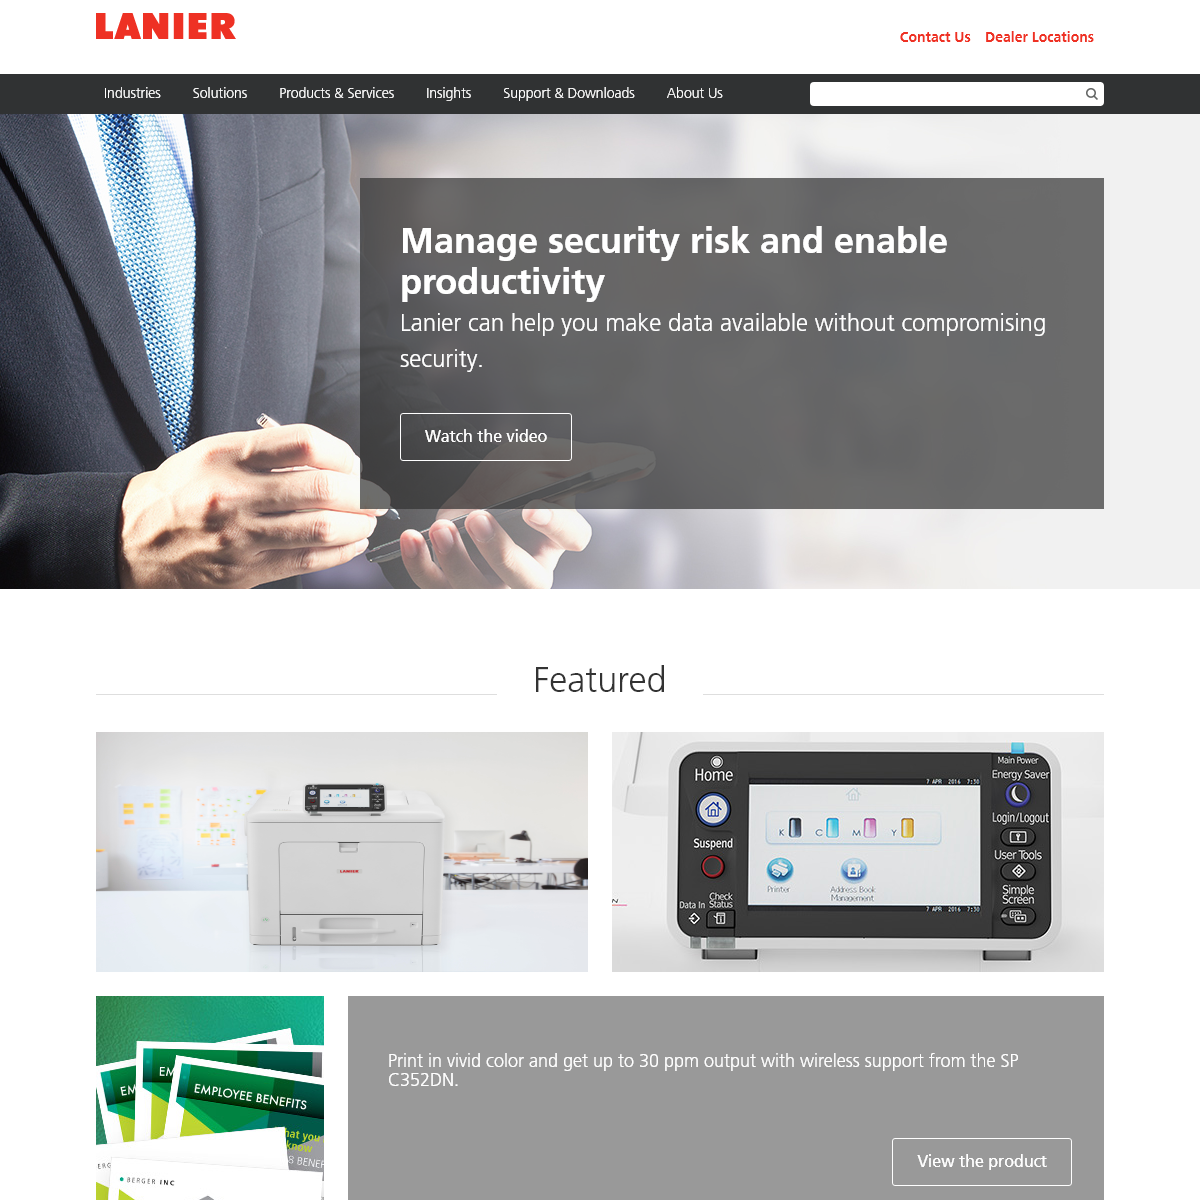 A complete backup of lanier.com